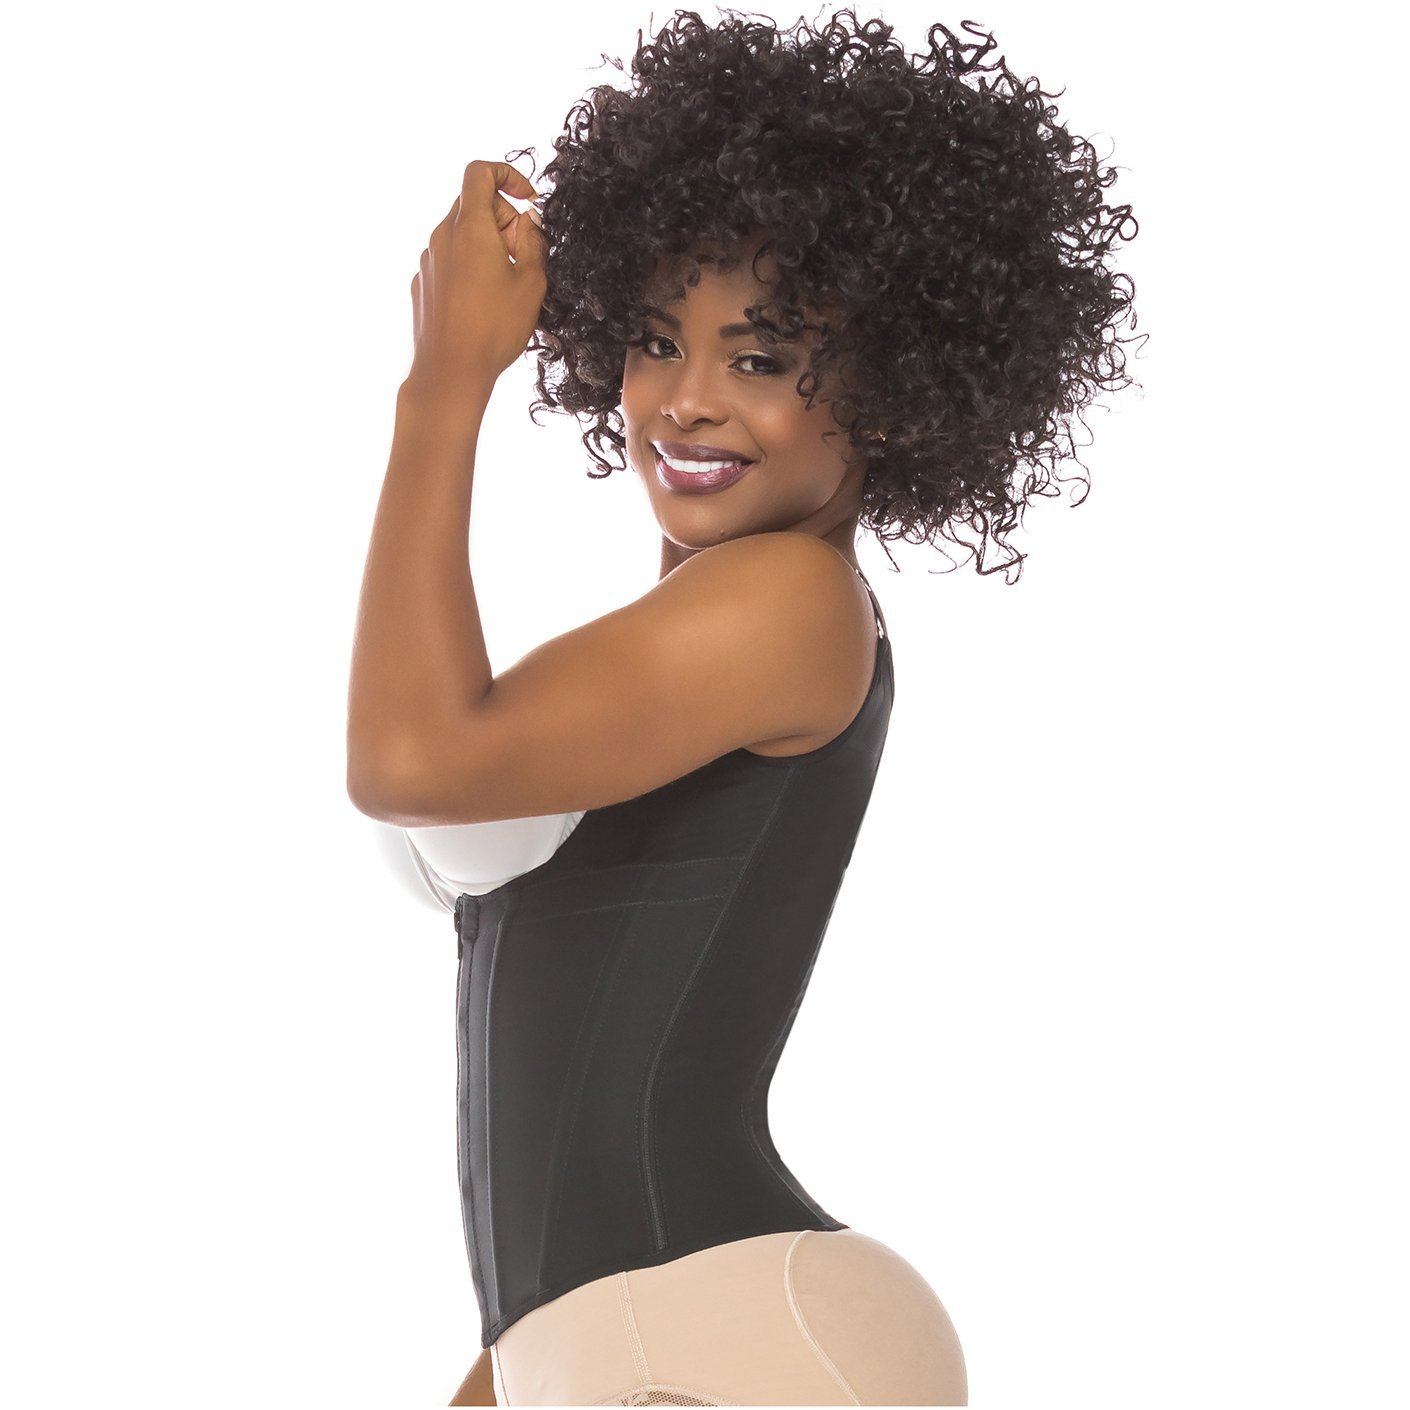 FAJAS SALOME 313 Colombian Body Shaper for Daily Use